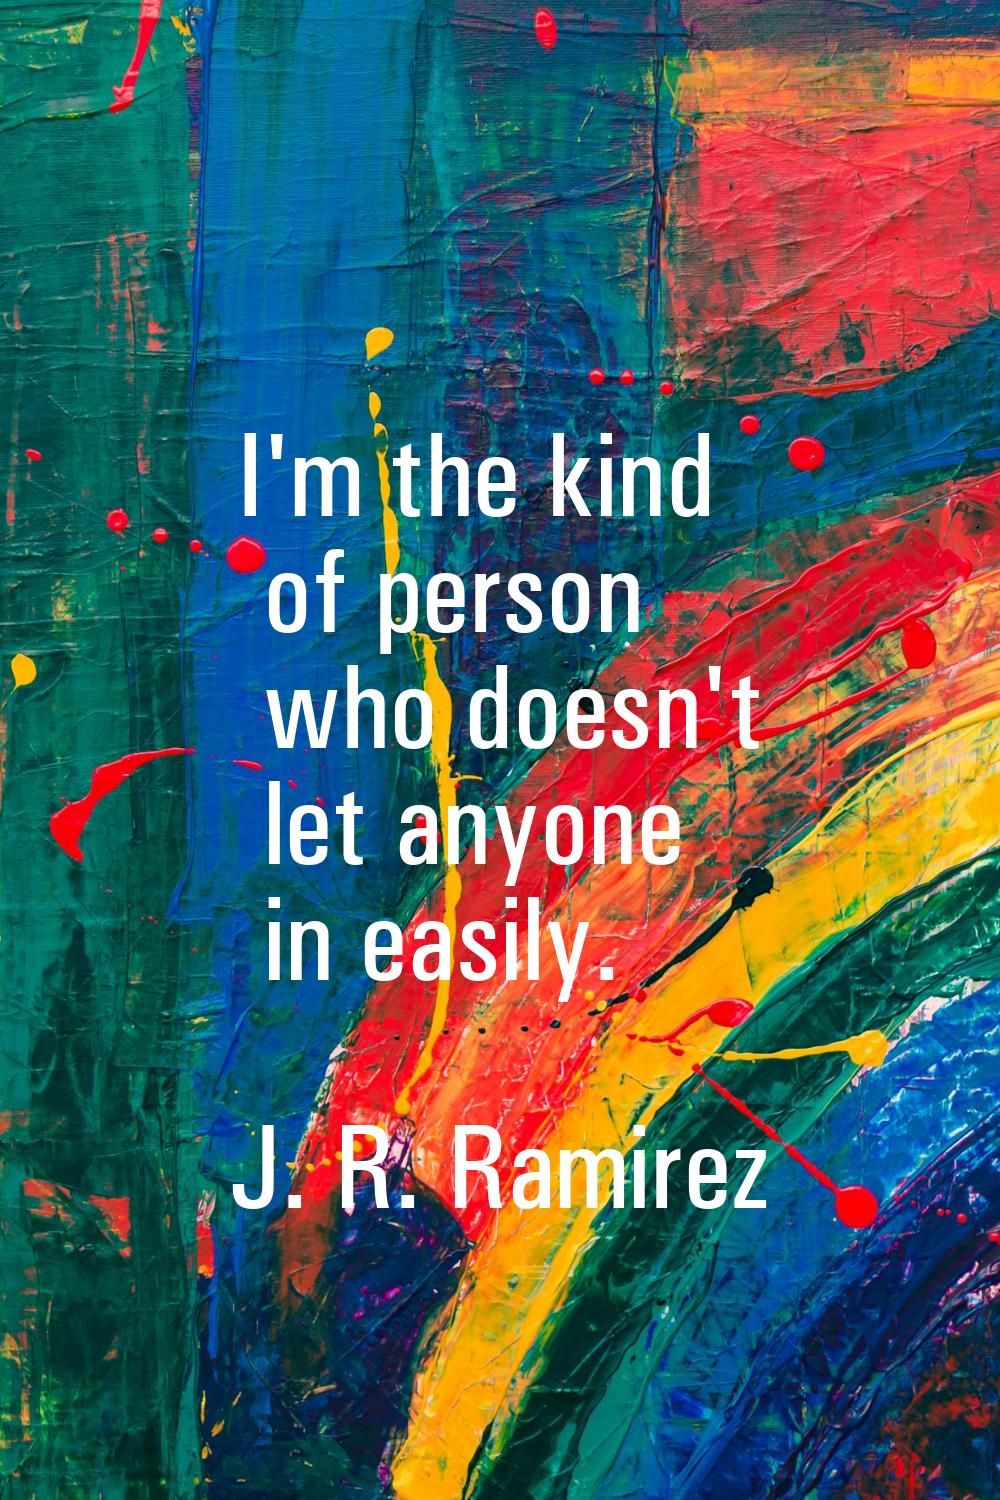 I'm the kind of person who doesn't let anyone in easily.